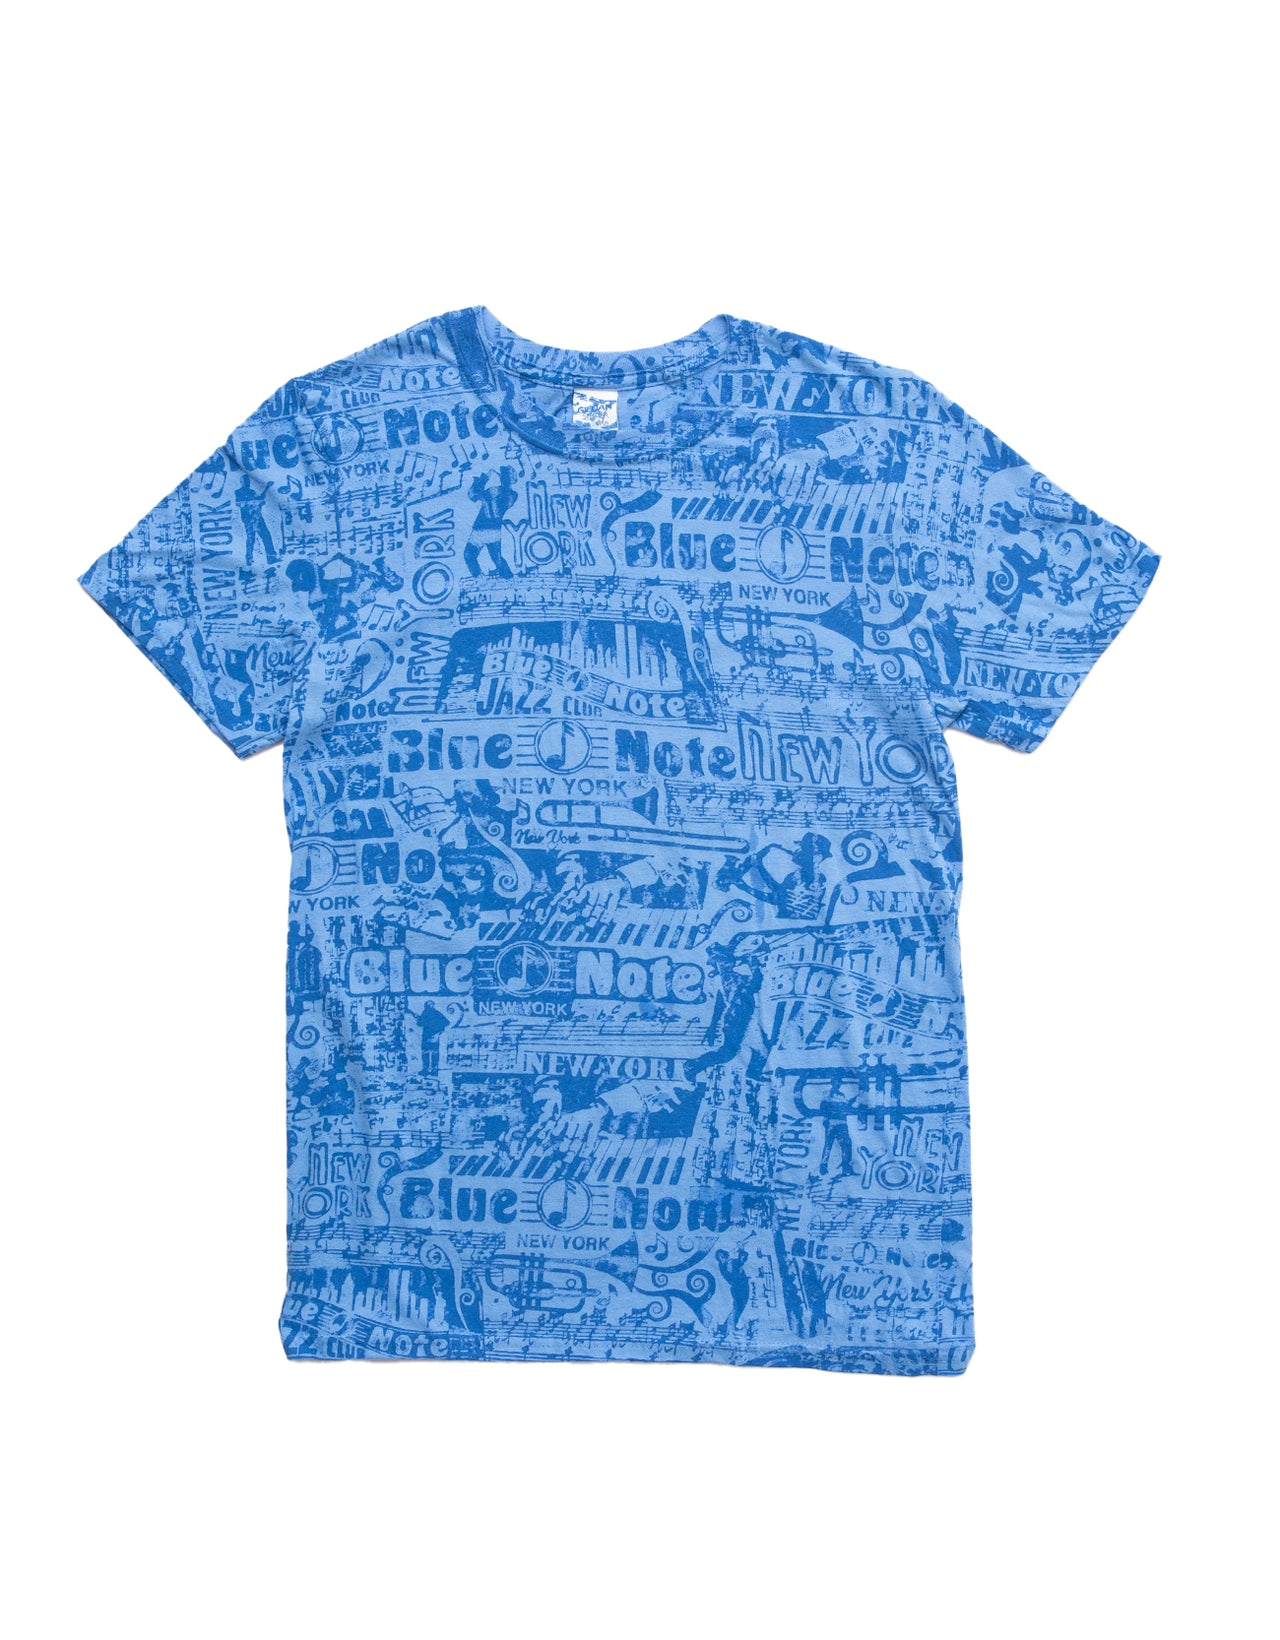 Blue Note All Over Print Tee